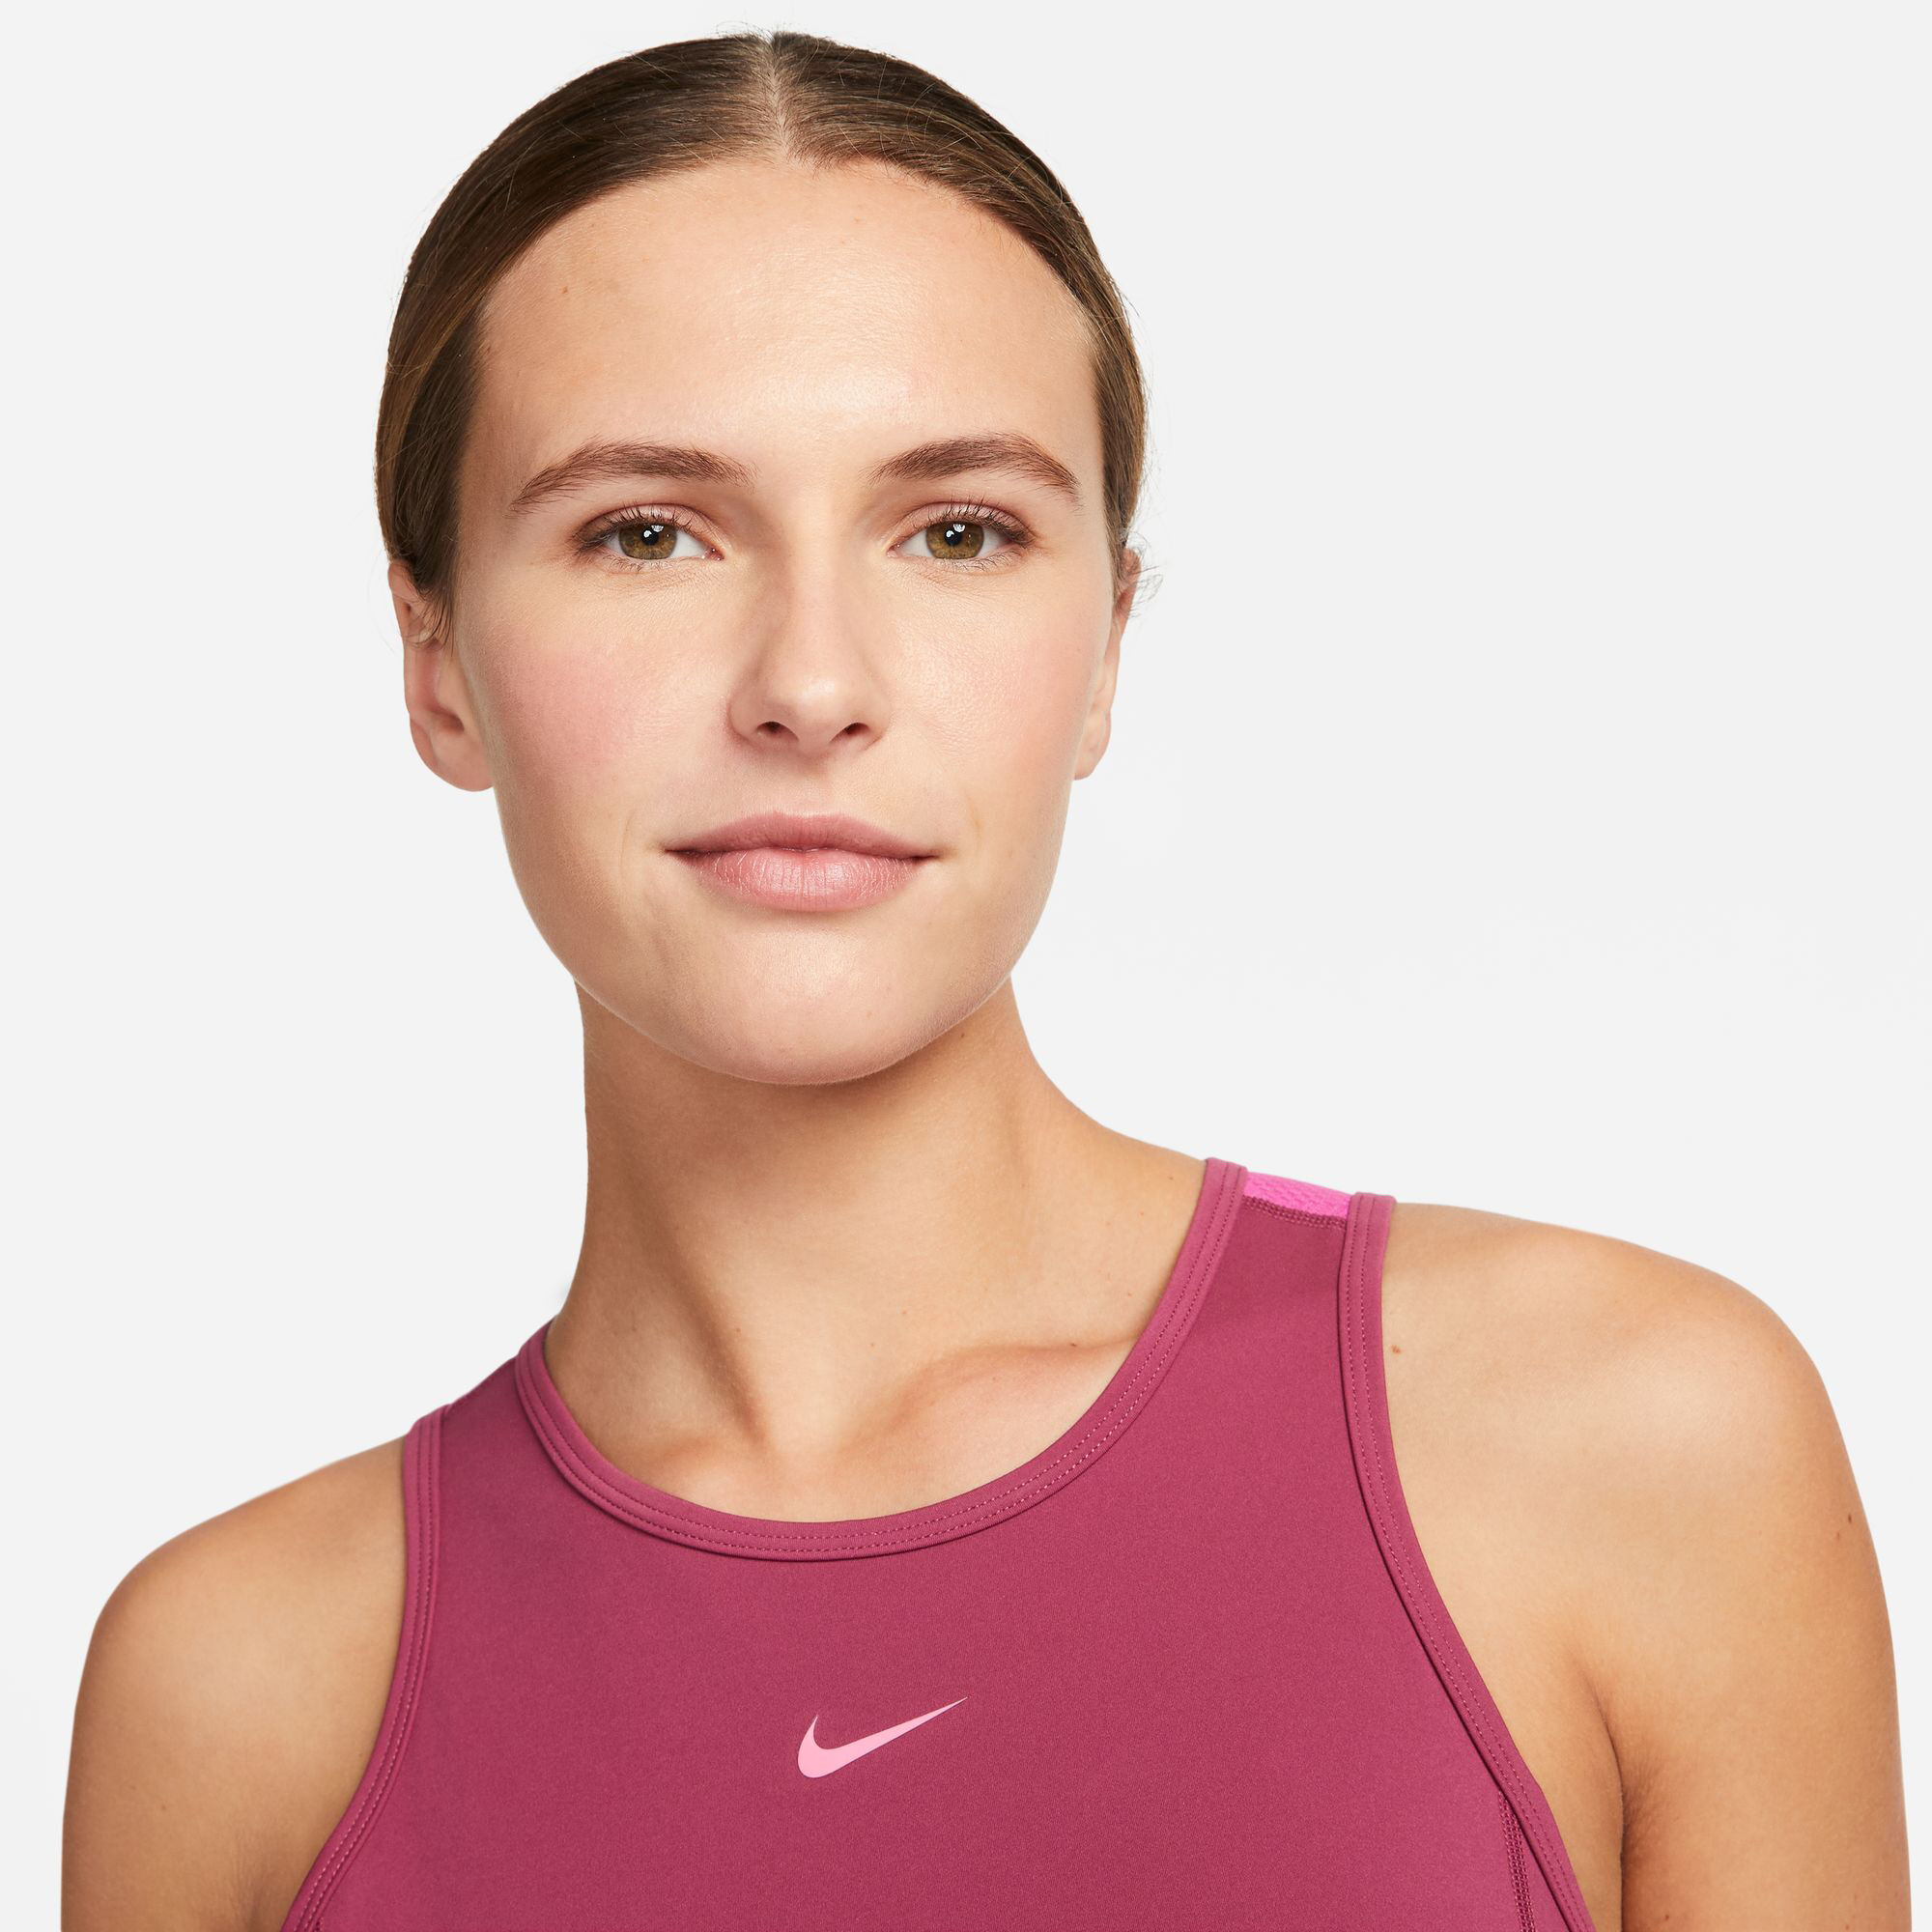 NIKE Women's Space-Dyed Cropped Tank Top Slim Fit, Pink, XL